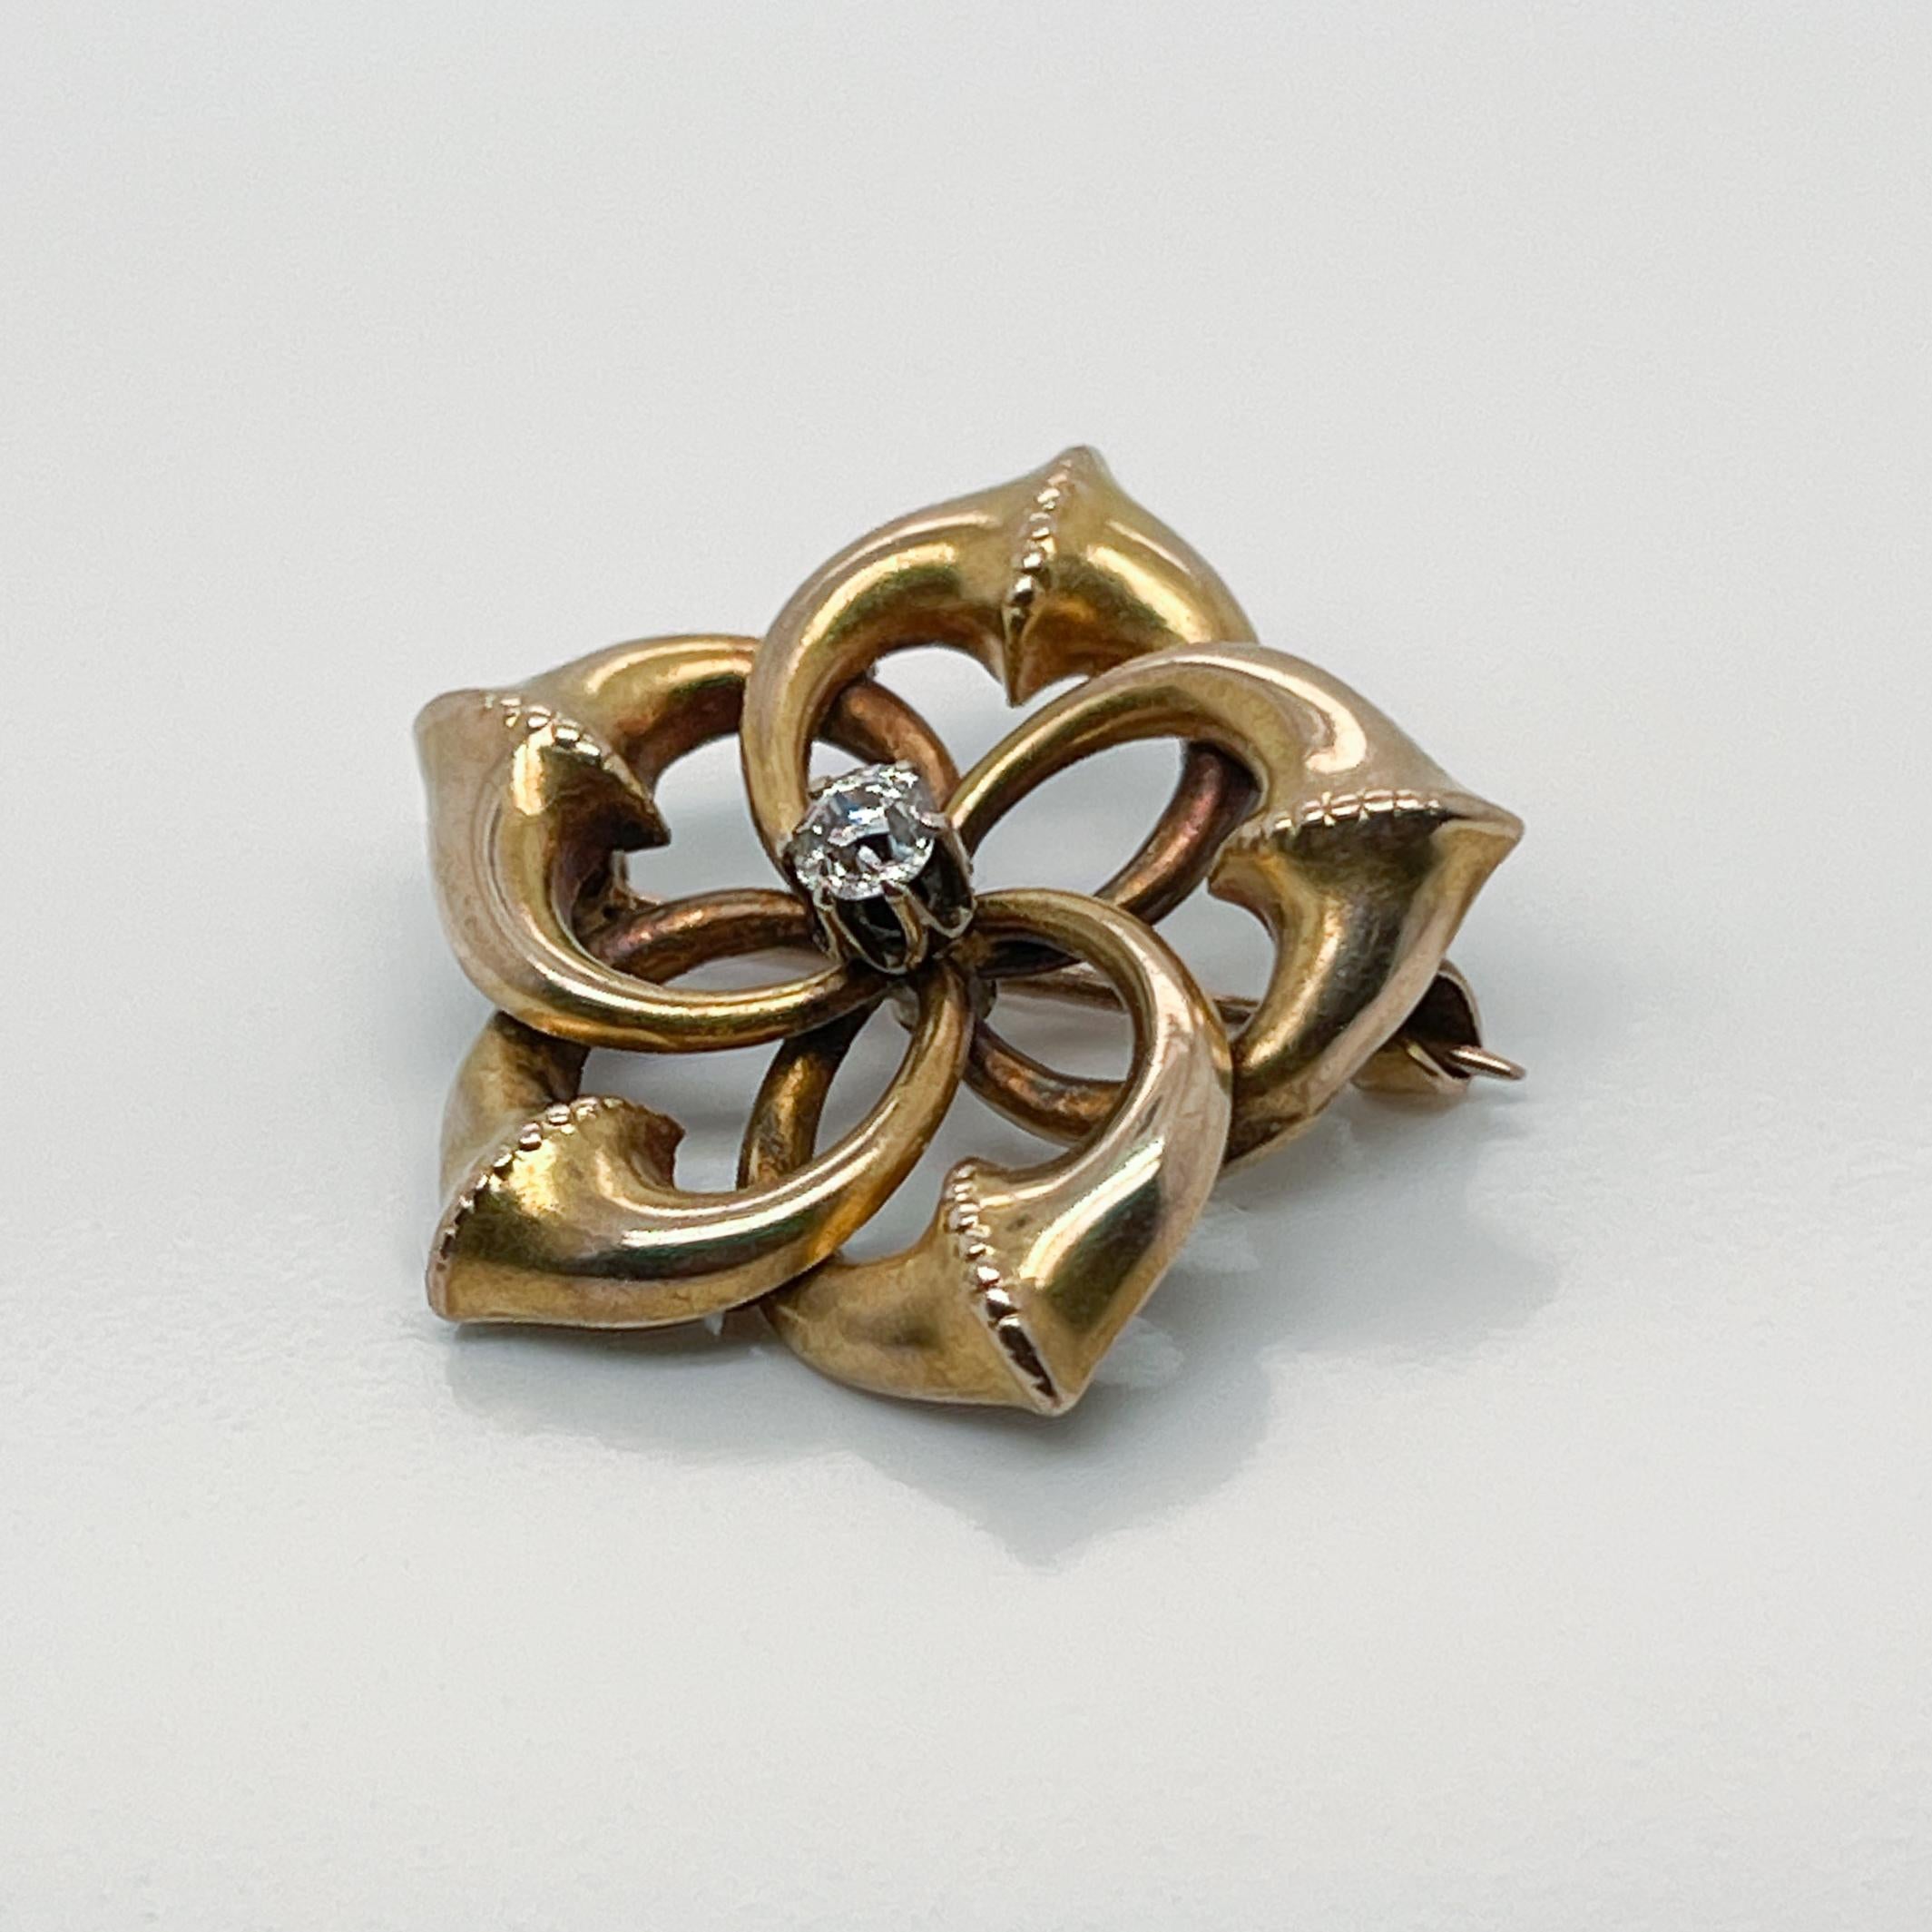 A fine Victorian brooch.

With interlocking gold circles that create a star or snowflake like shape. 

A round rose cut white diamond is prong set at the center of the pin.

Simply a wonderful, antique brooch!

Date:
19th Century

Overall